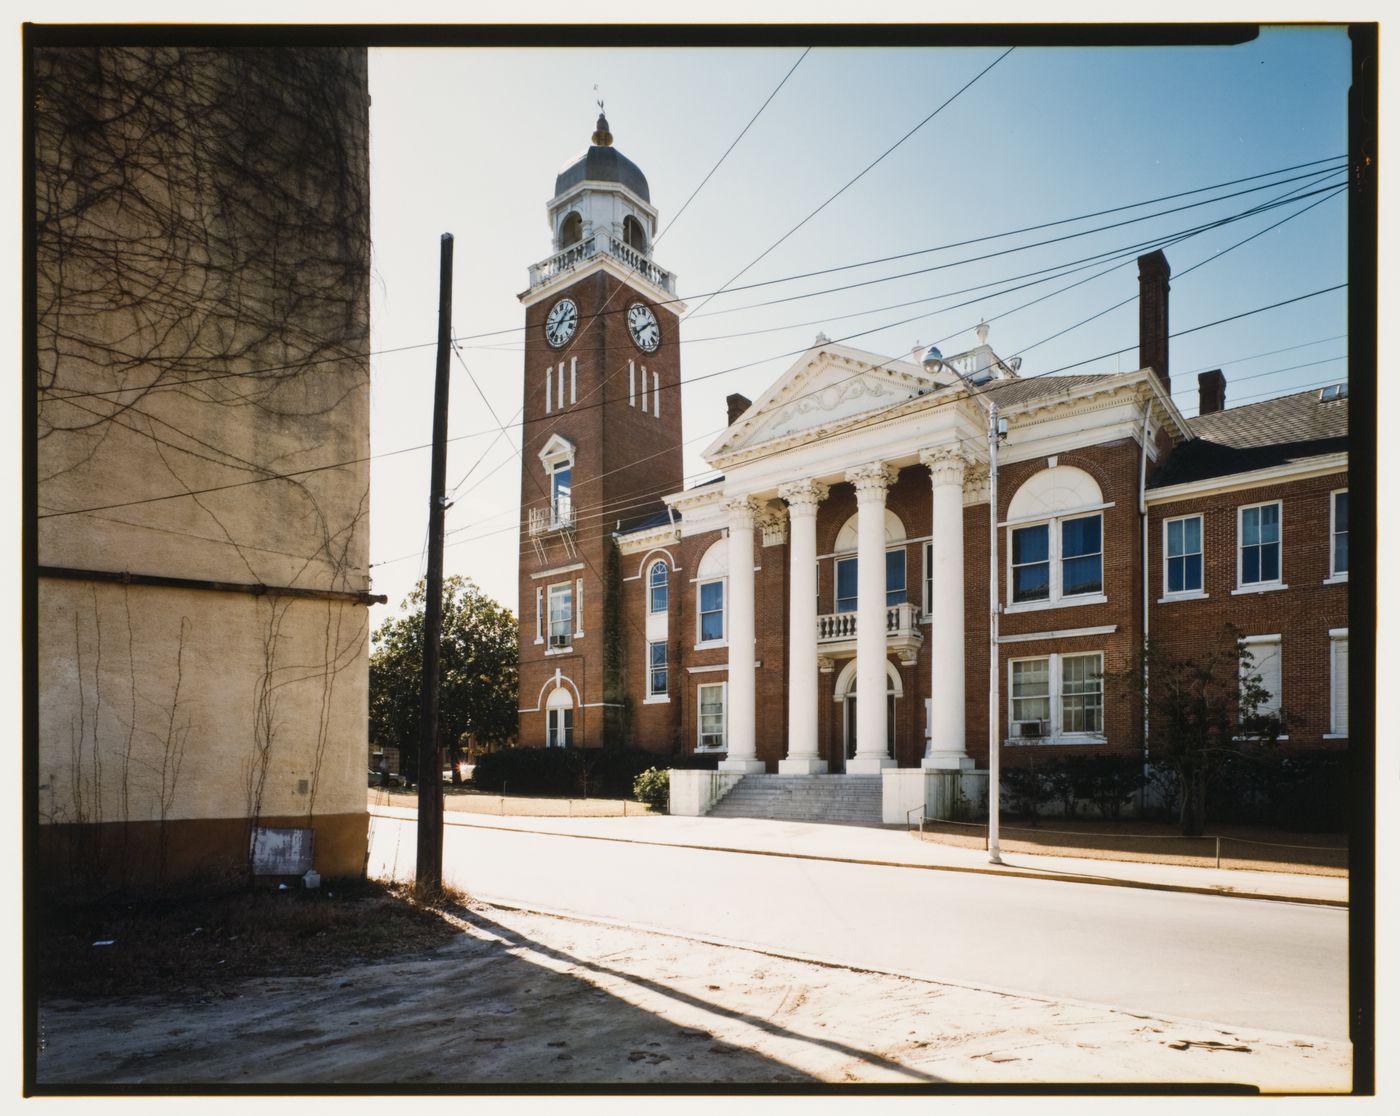 View of the Decatur County Courthouse, Bainbridge, Georgia, United States